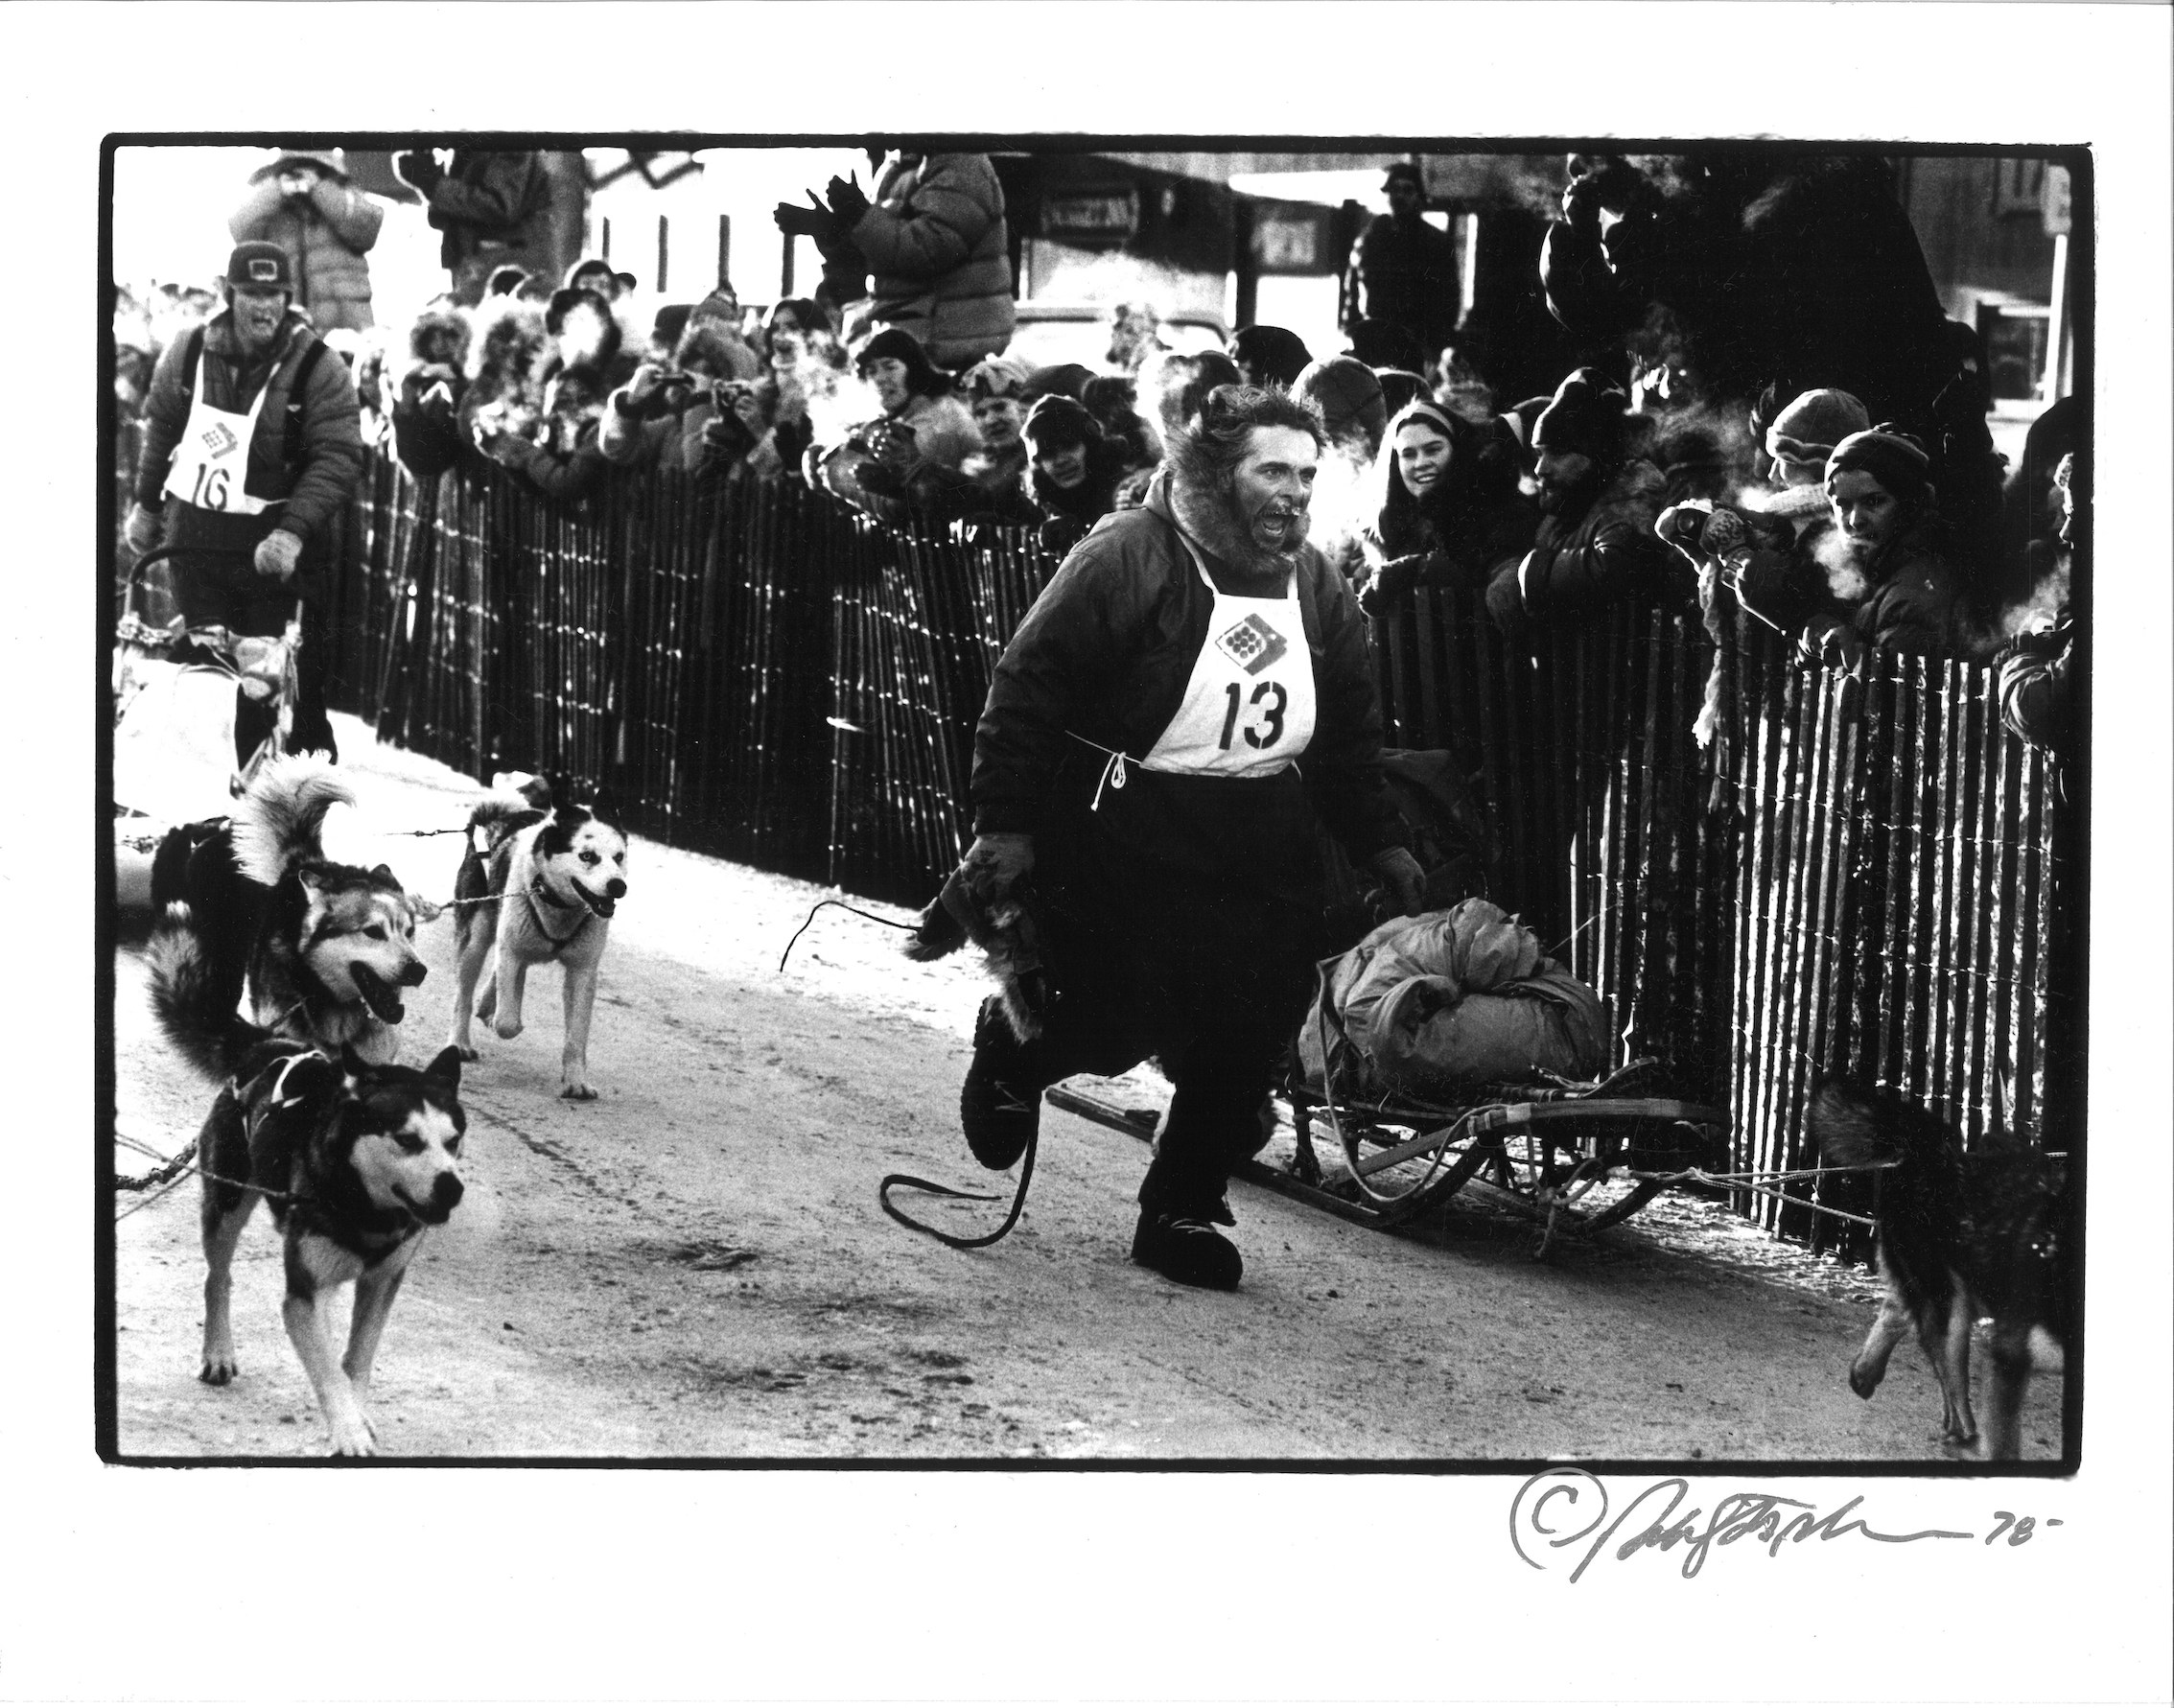 Black and white photo of man with bib number on running by his sled holding a whip while another team of dogs runs next to him. Crowd of viewers line a fence and watch.